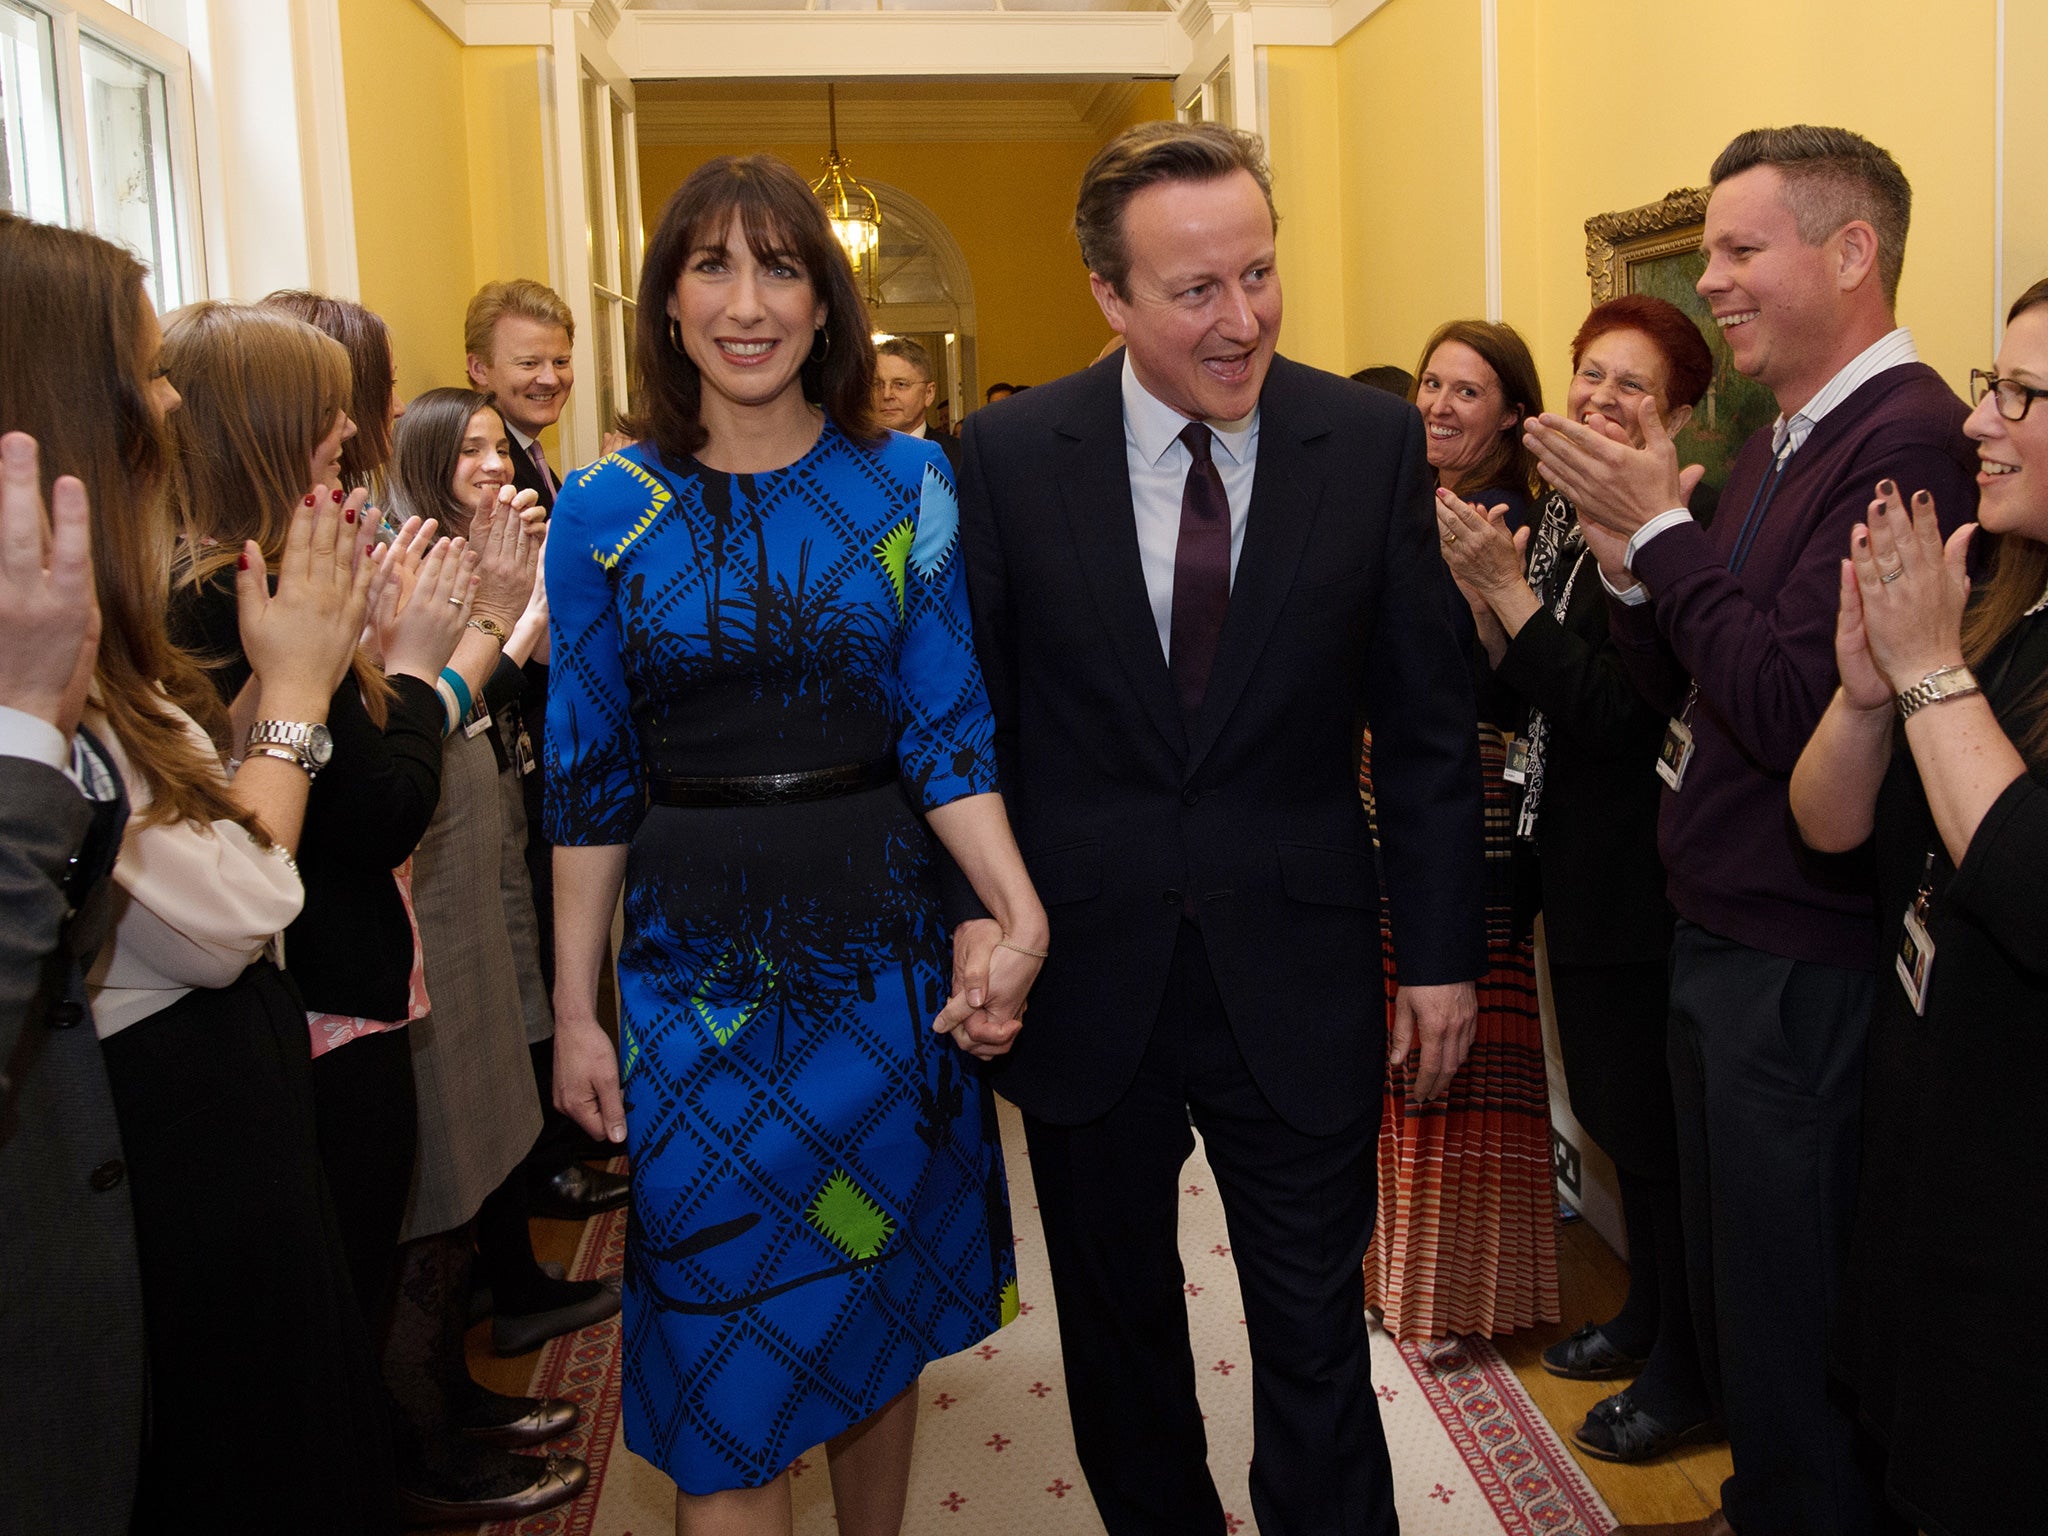 Rebecca Roache said she 'didn't want to be friends with conservatives' after David Cameron became Prime Minister again